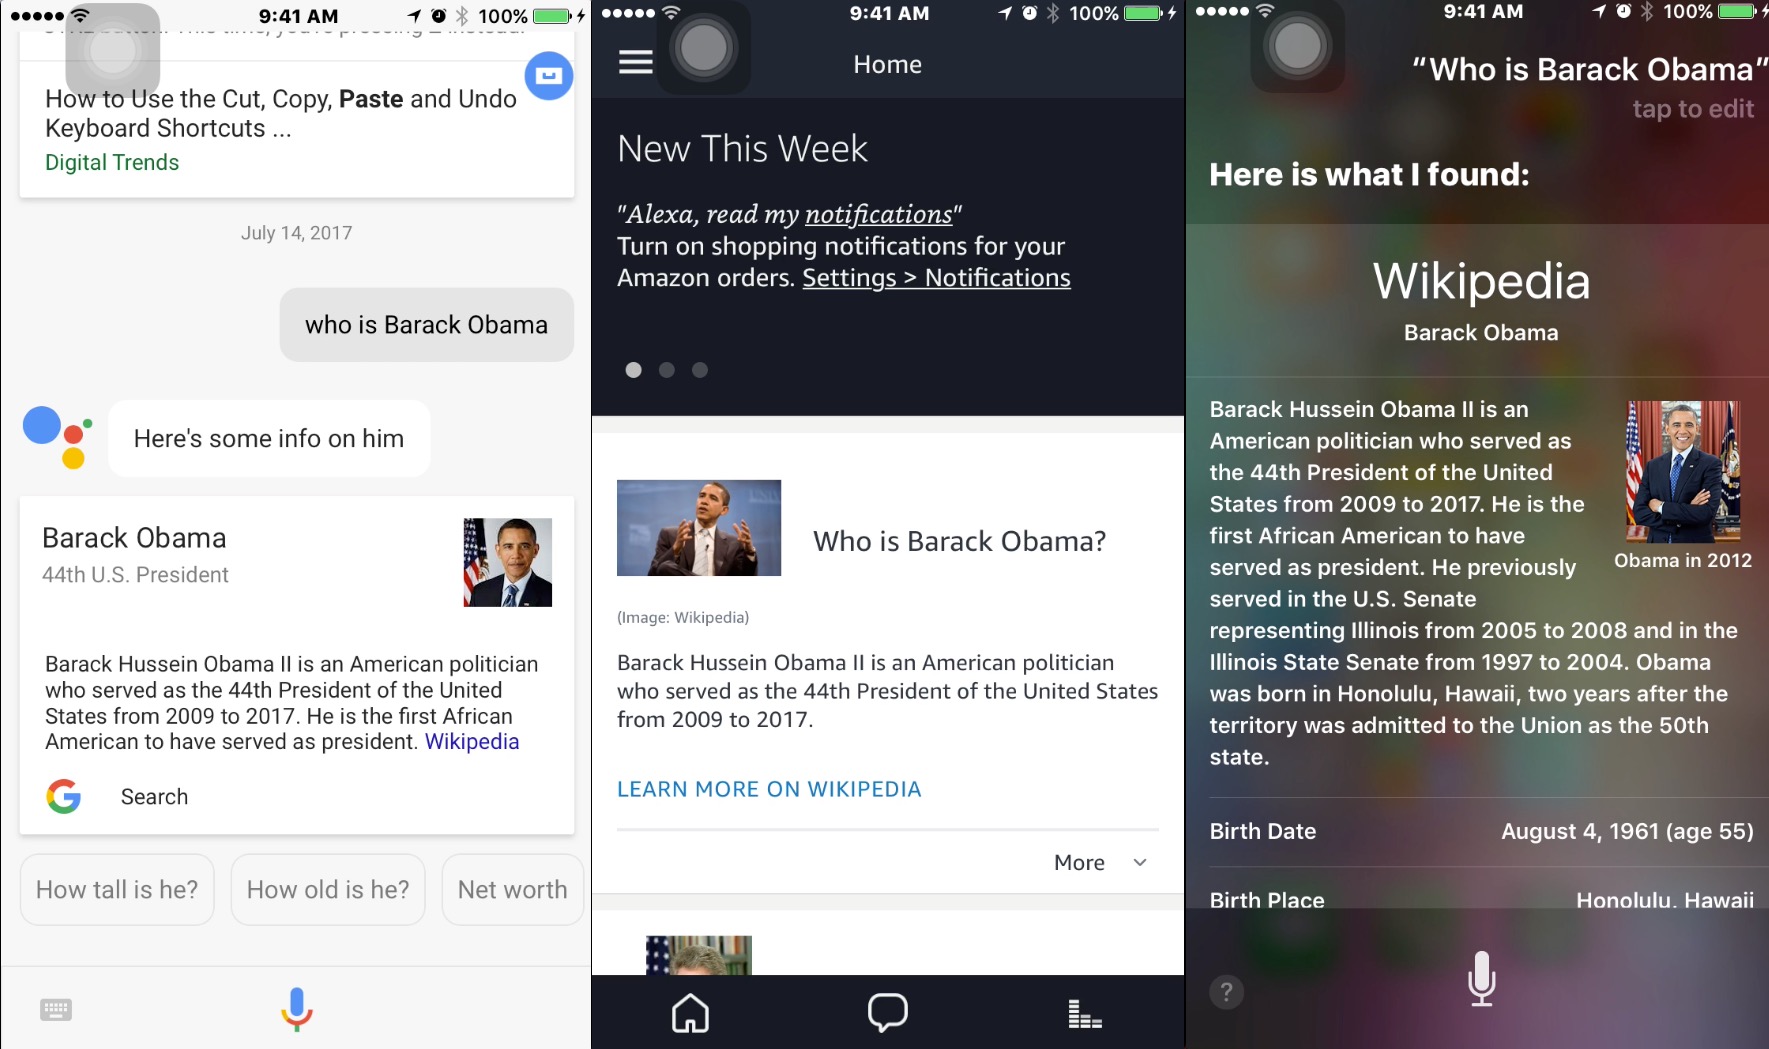 Three screenshots of mobile assistants being asked "Who is Barack Obama?" appear beside each other